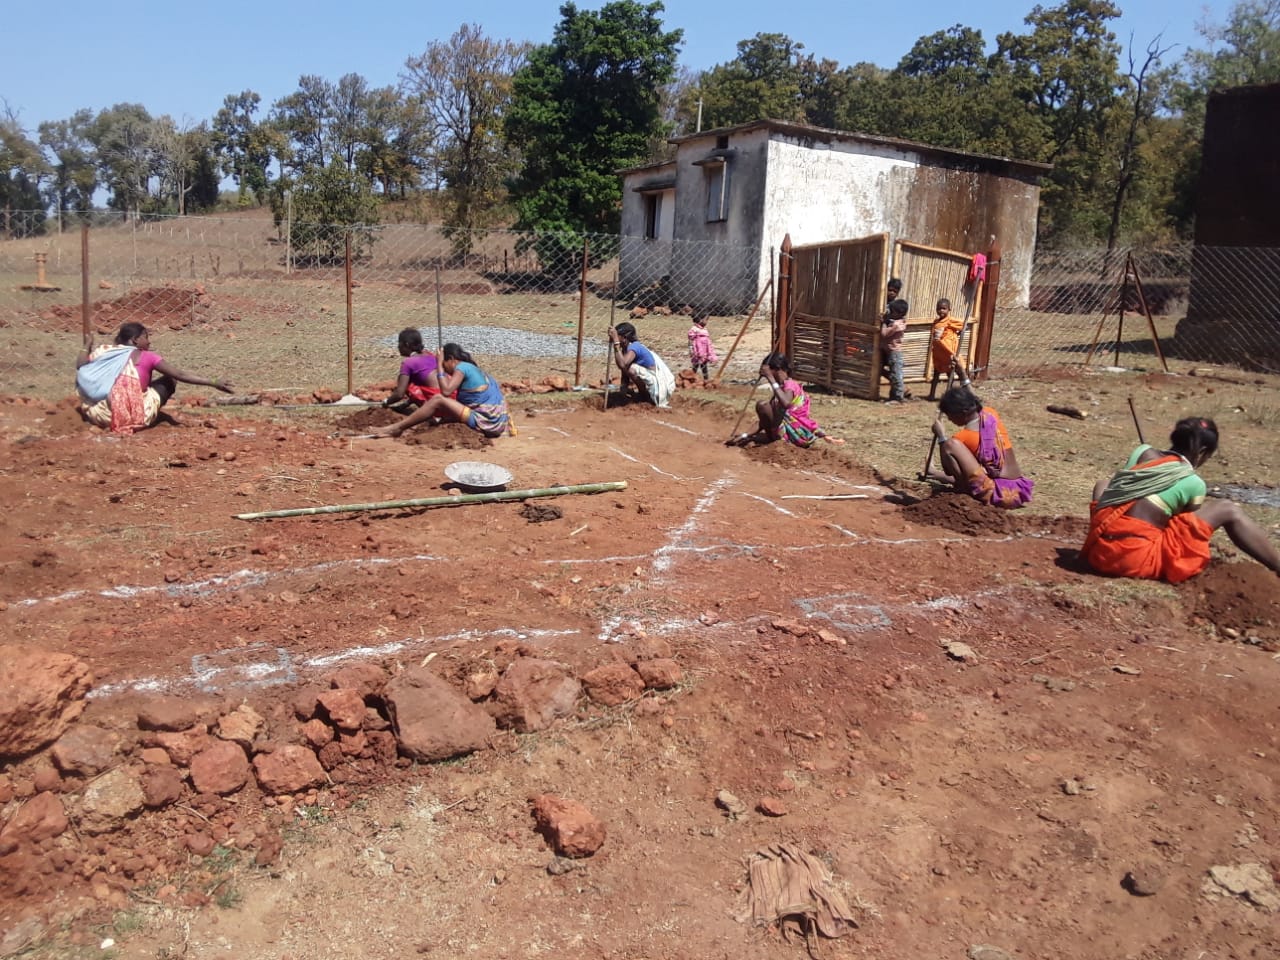 Self-help groups and collective learning in Shambhupipar